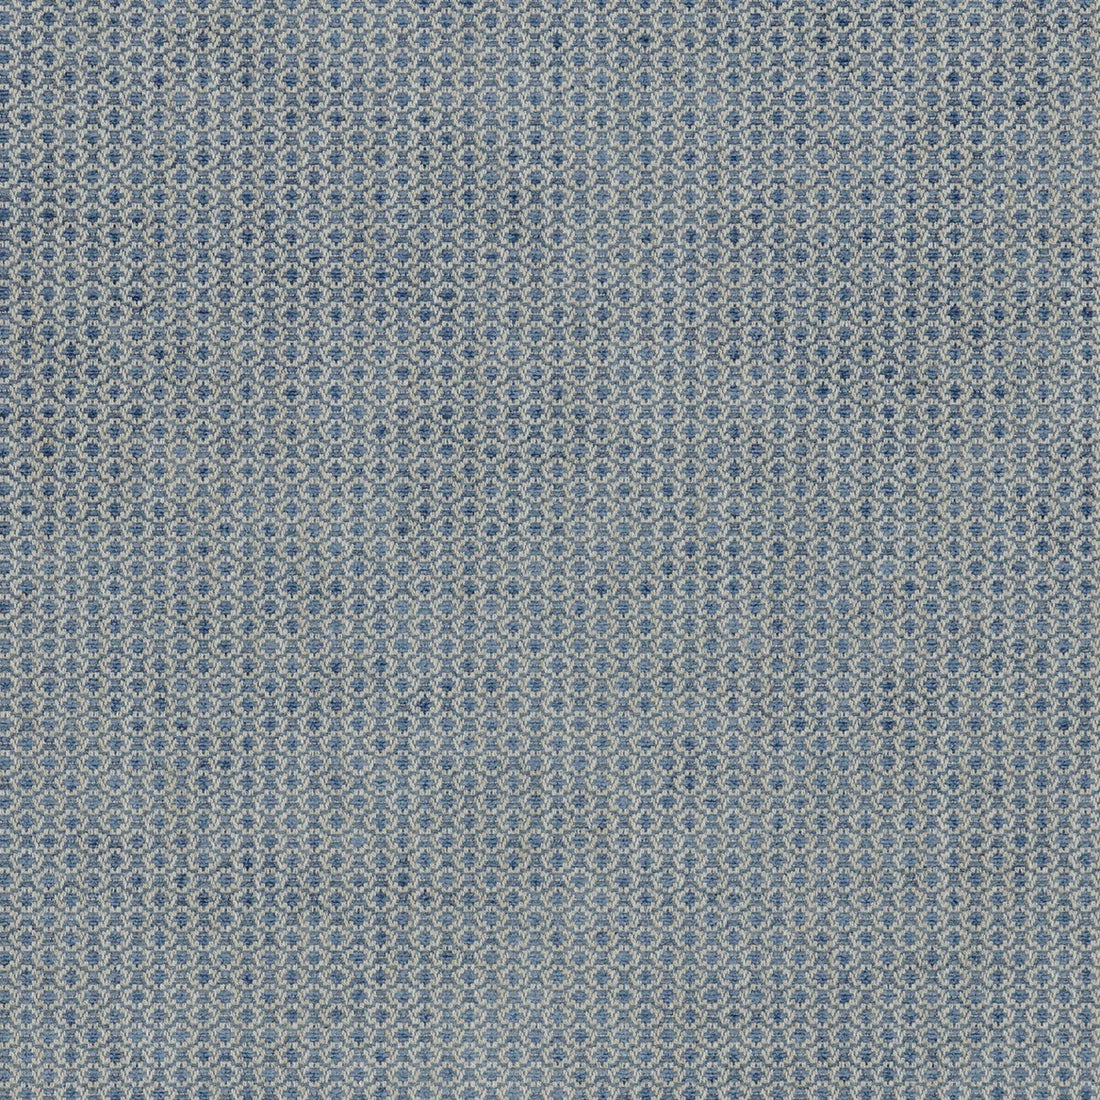 Cosgrove fabric in cadet color - pattern BFC-3672.15.0 - by Lee Jofa in the Blithfield collection